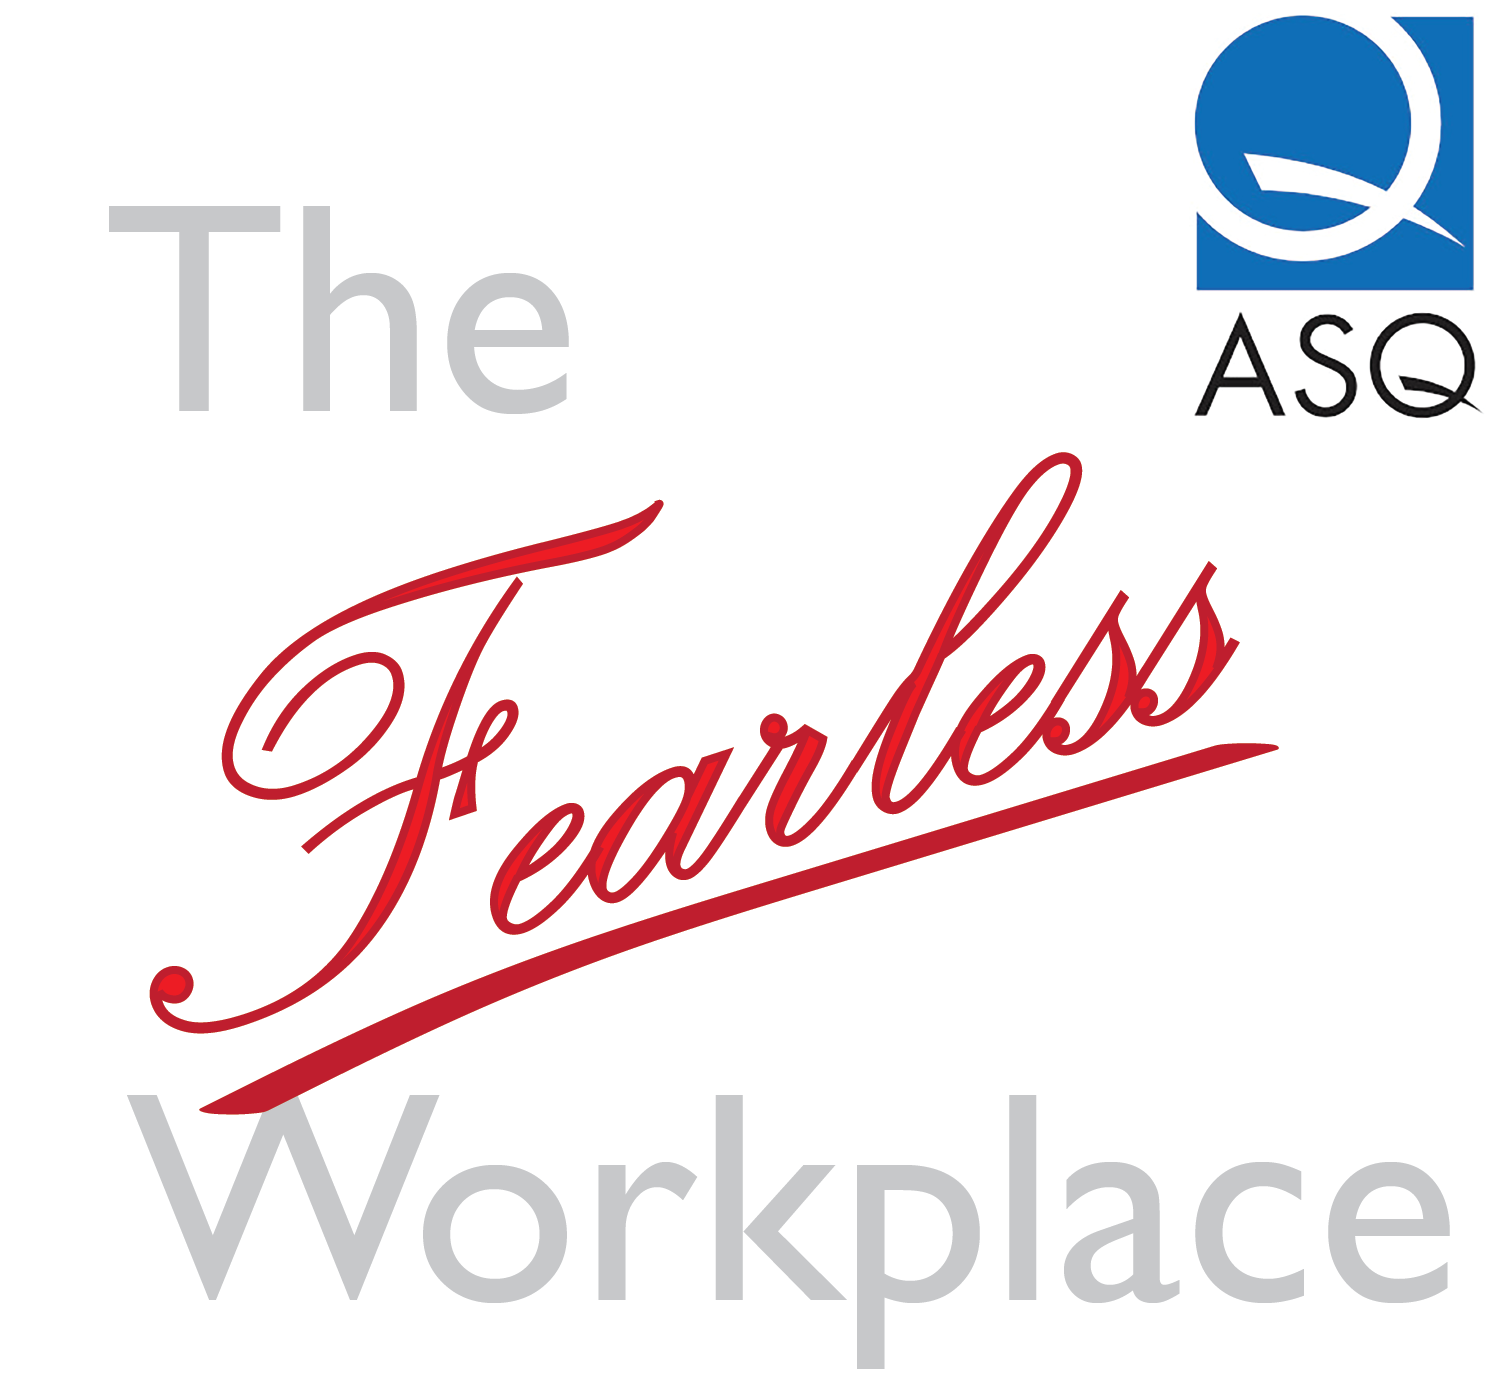 "The Fearless Workplace" Has Arrived! 3027